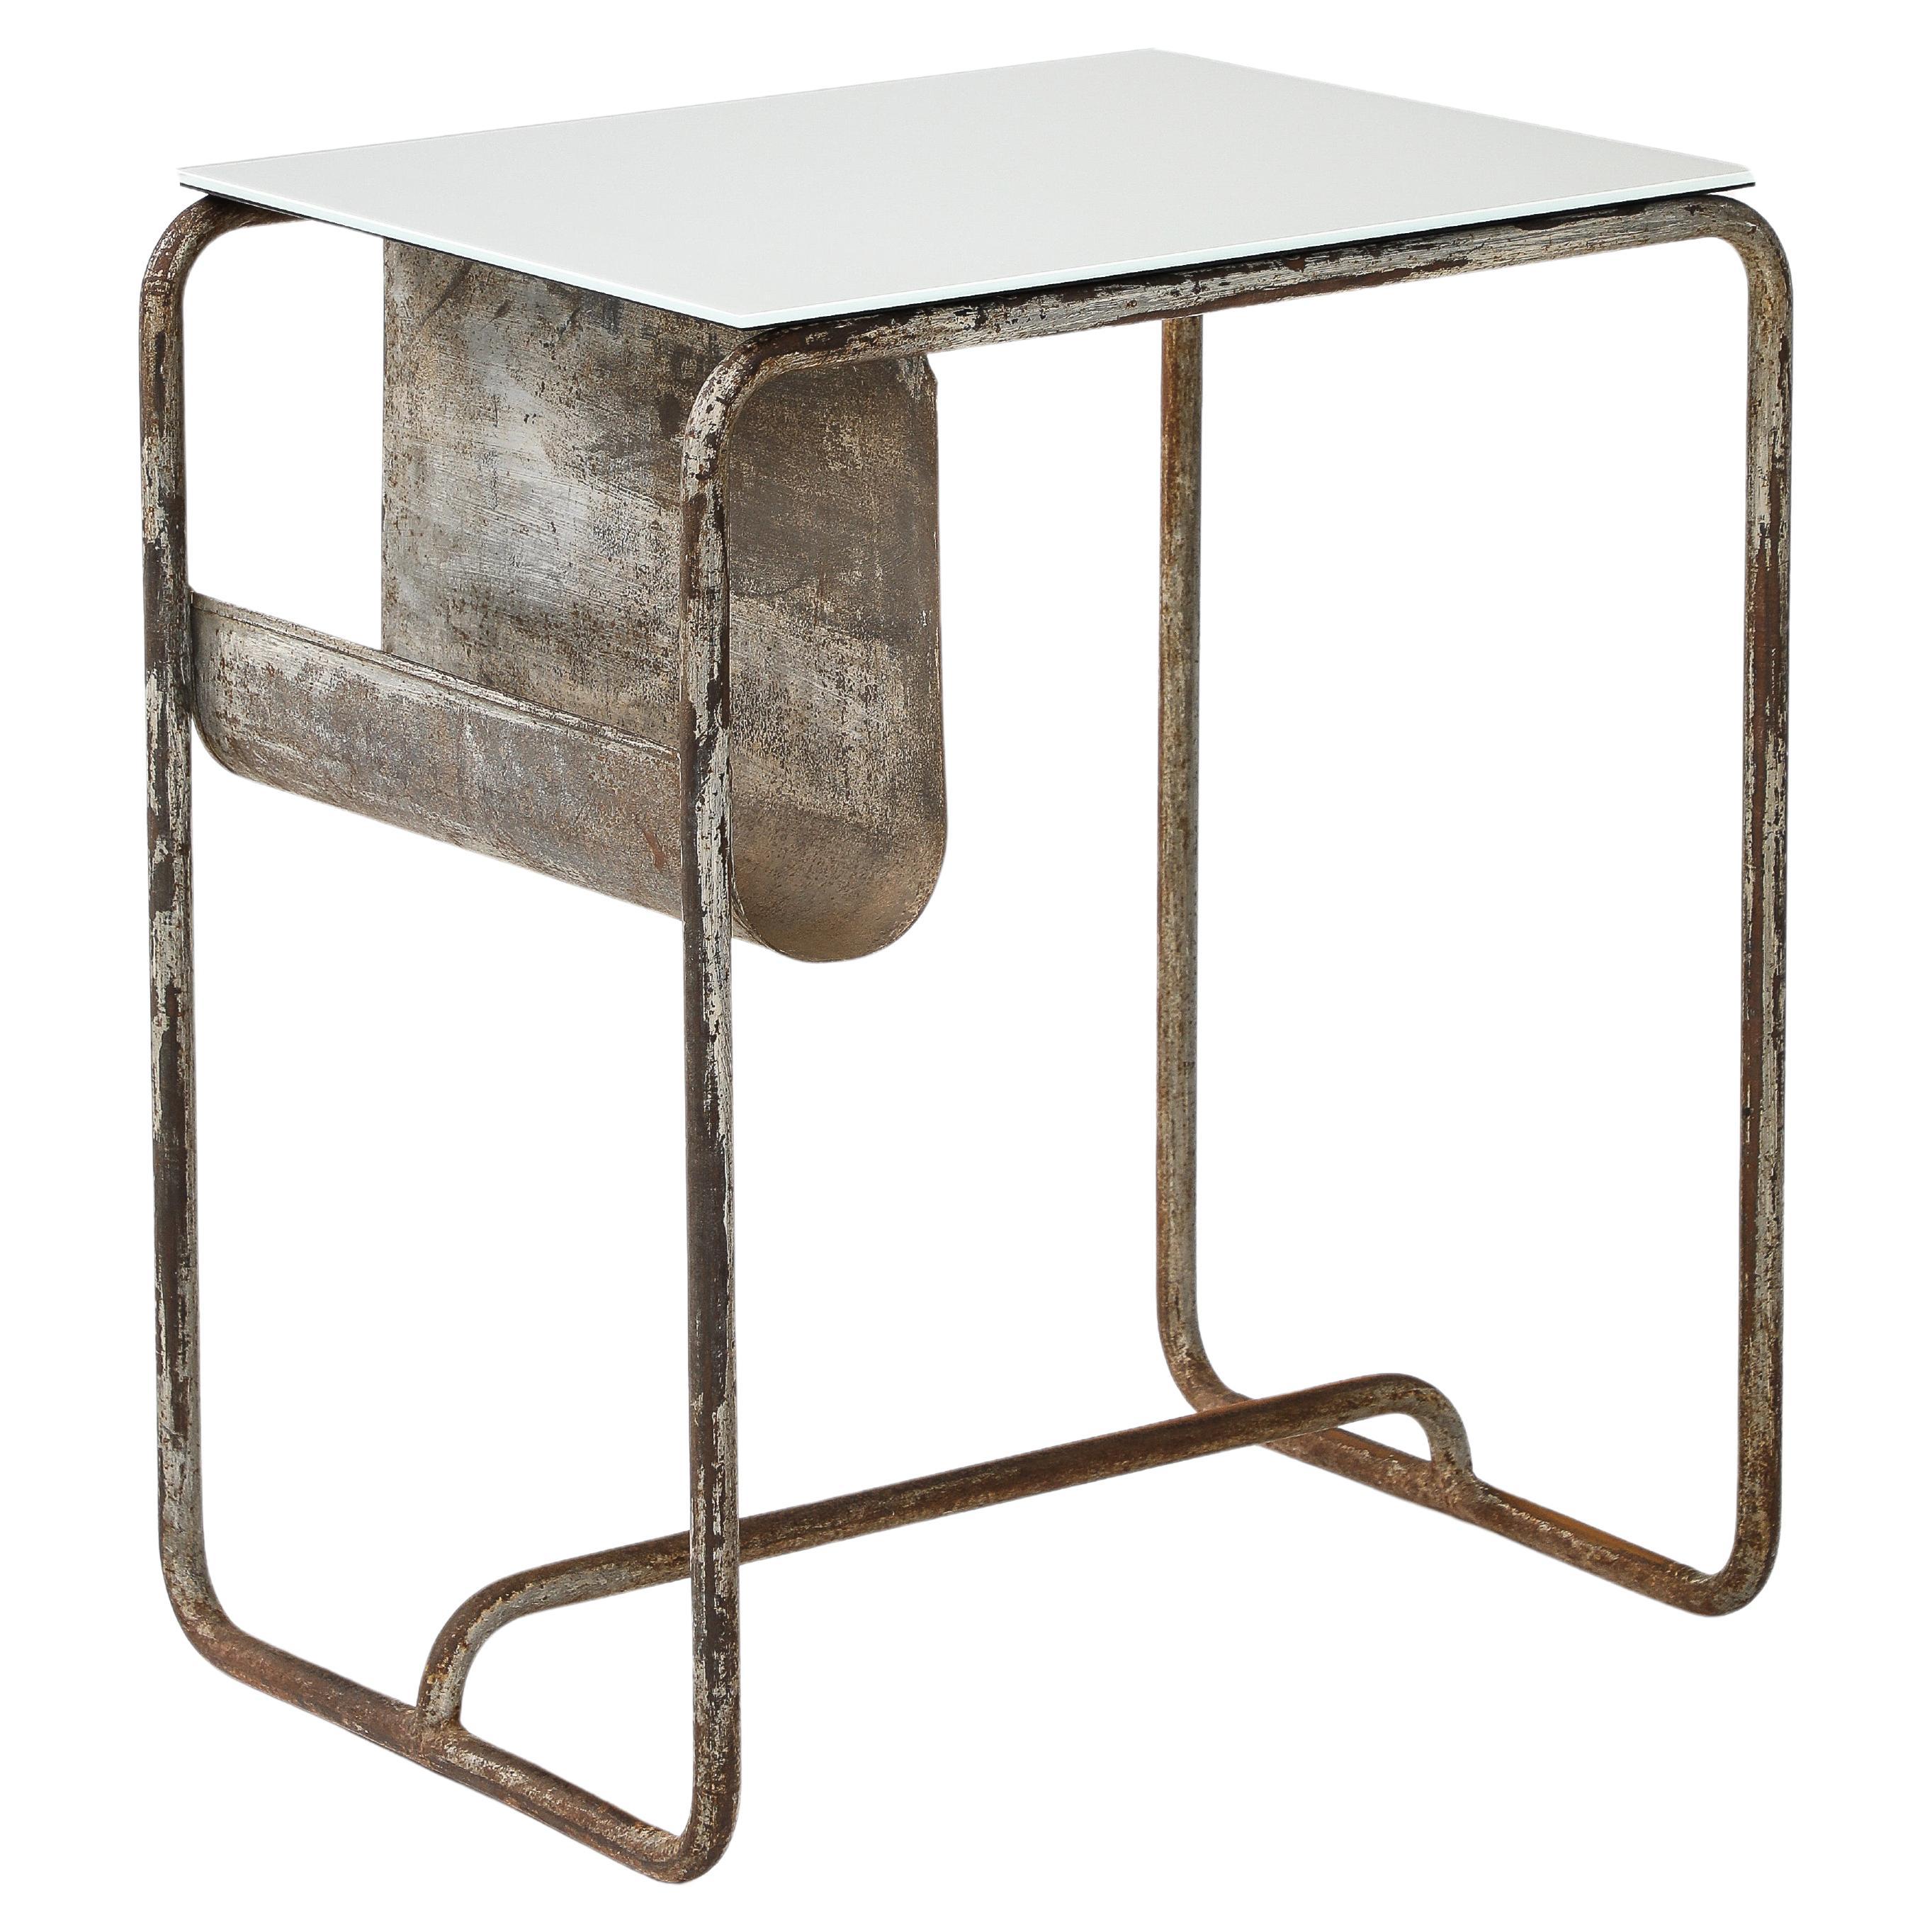 Early Modernist Desk Side Table, Nickel Patina, Opaline Top, France, c. 1920 For Sale